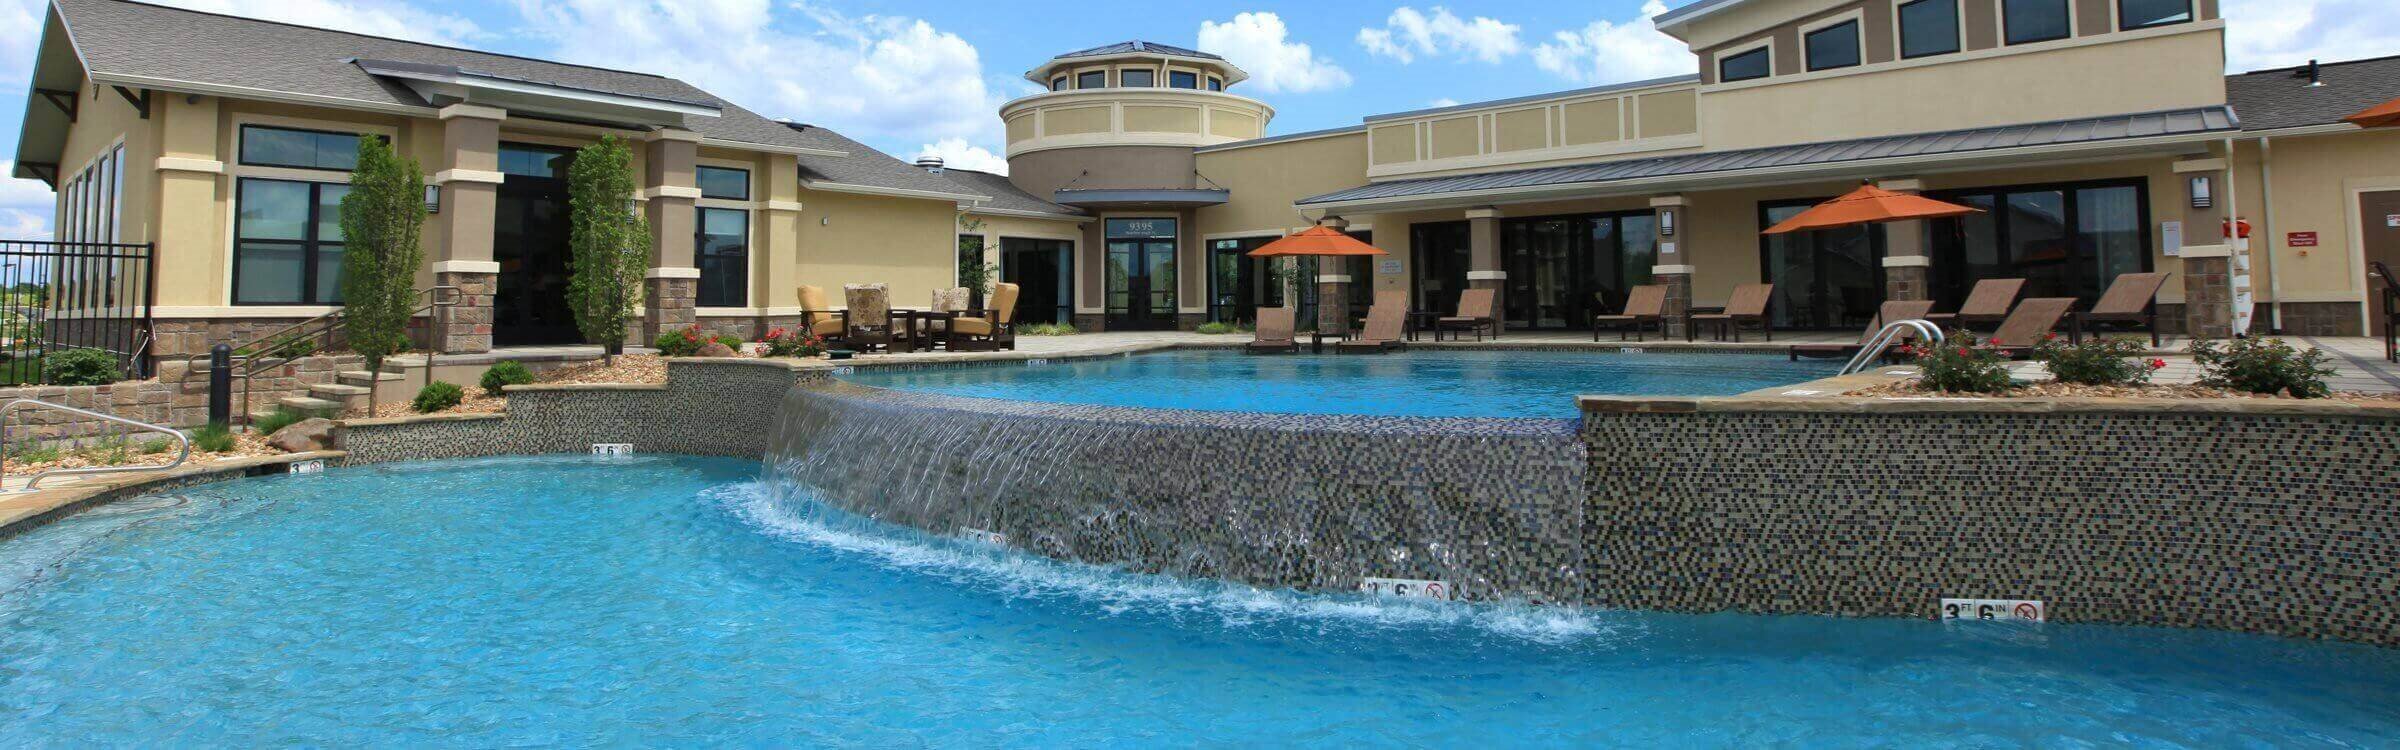 a large pool with a waterfall in front of a house  at Prairie Creek Apartments & Townhomes, Kansas